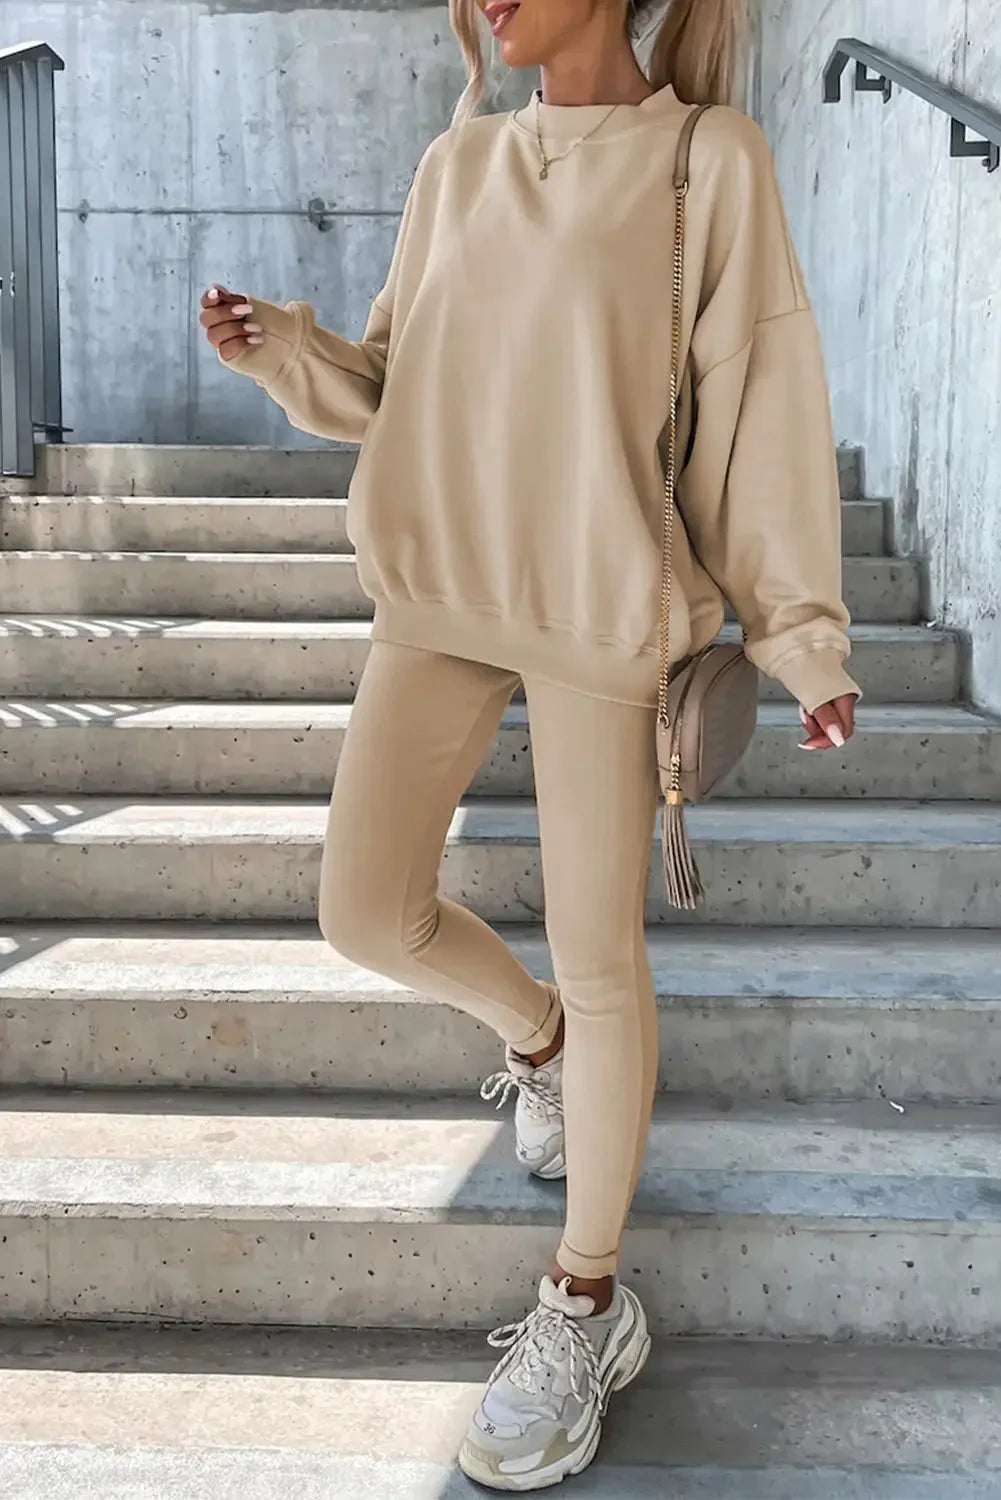 Beige solid sweatshirt and leggings two piece set - l 50% polyester + 50% cotton pants sets